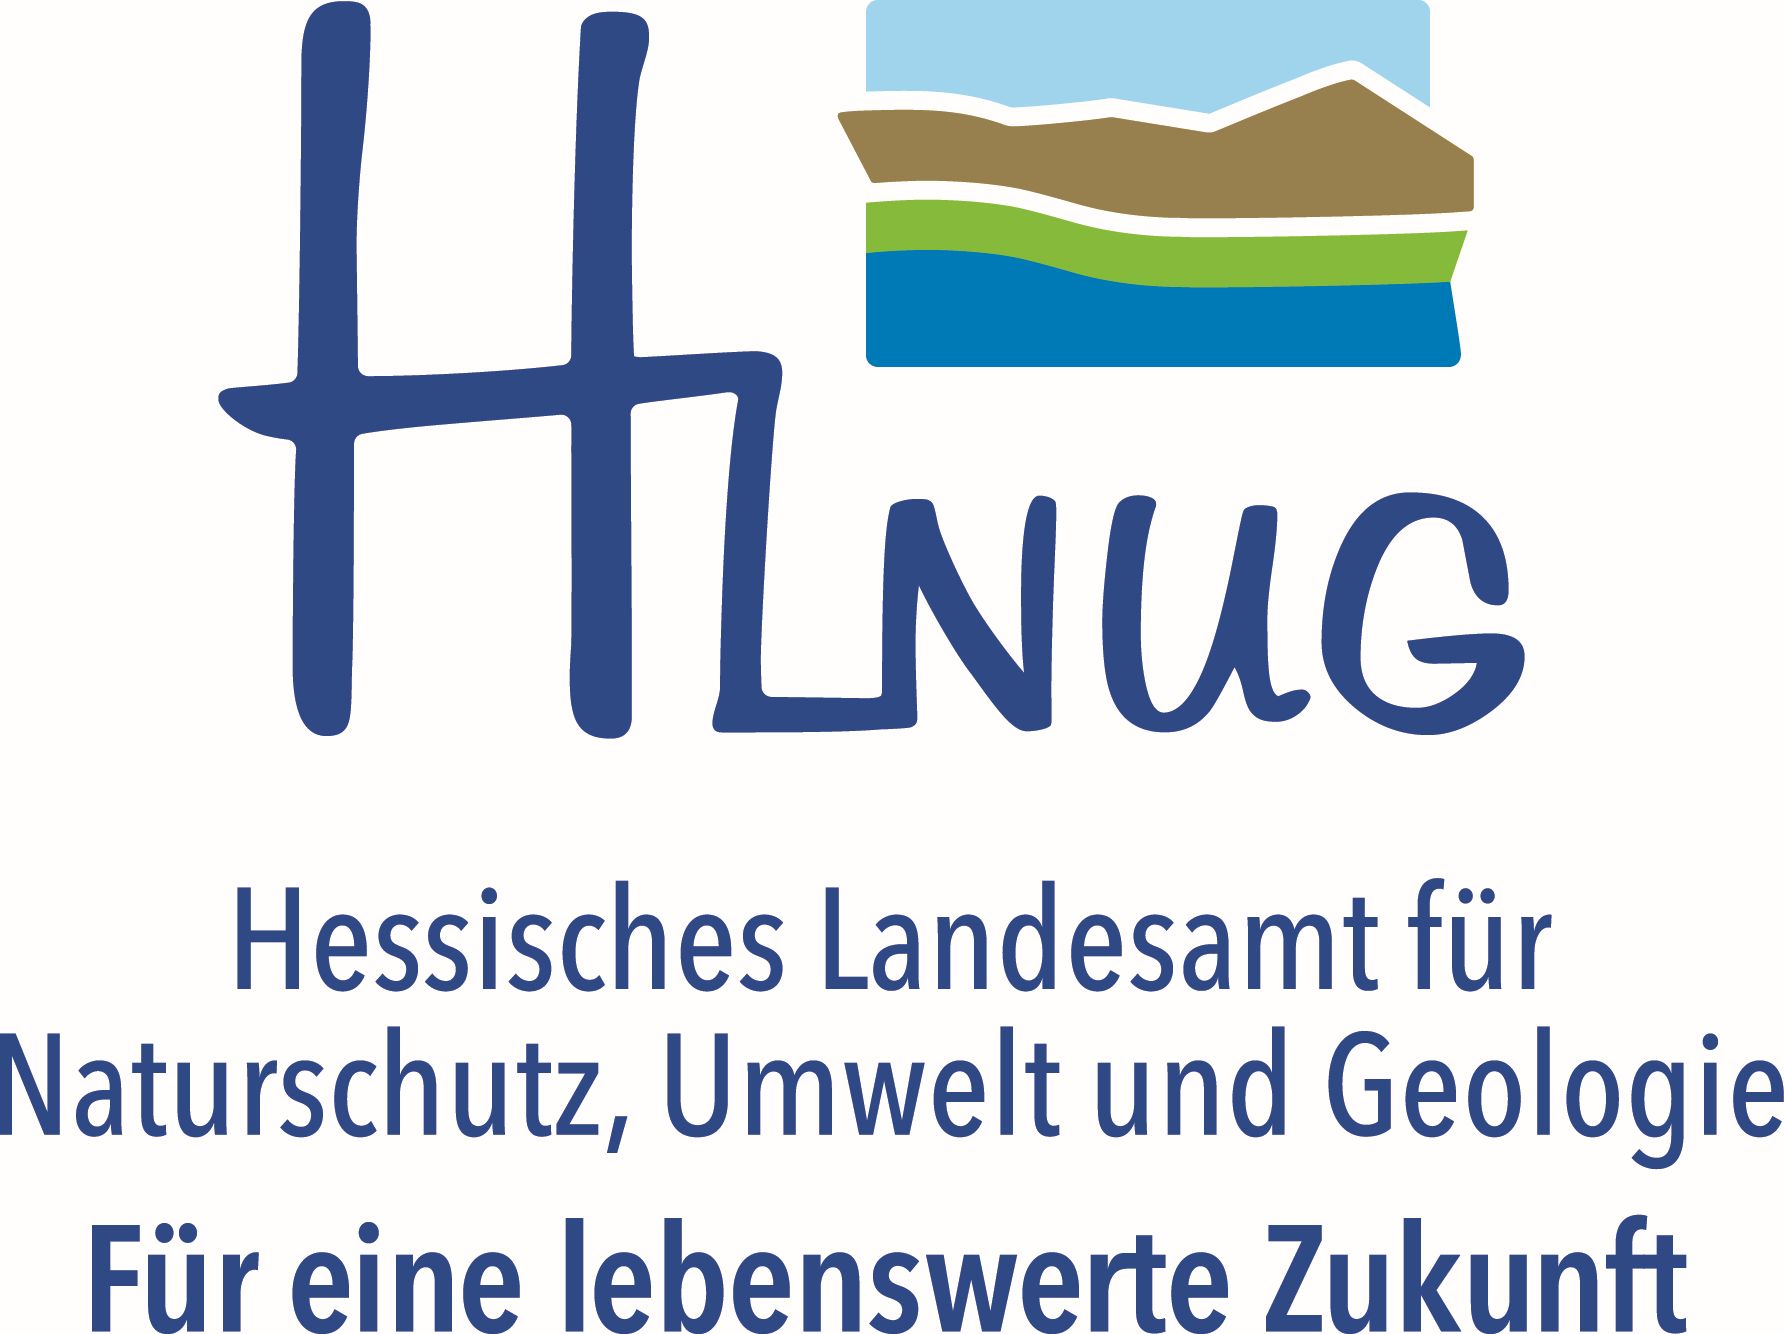 Hessian Agency for Nature Conservation, Environment and Geology